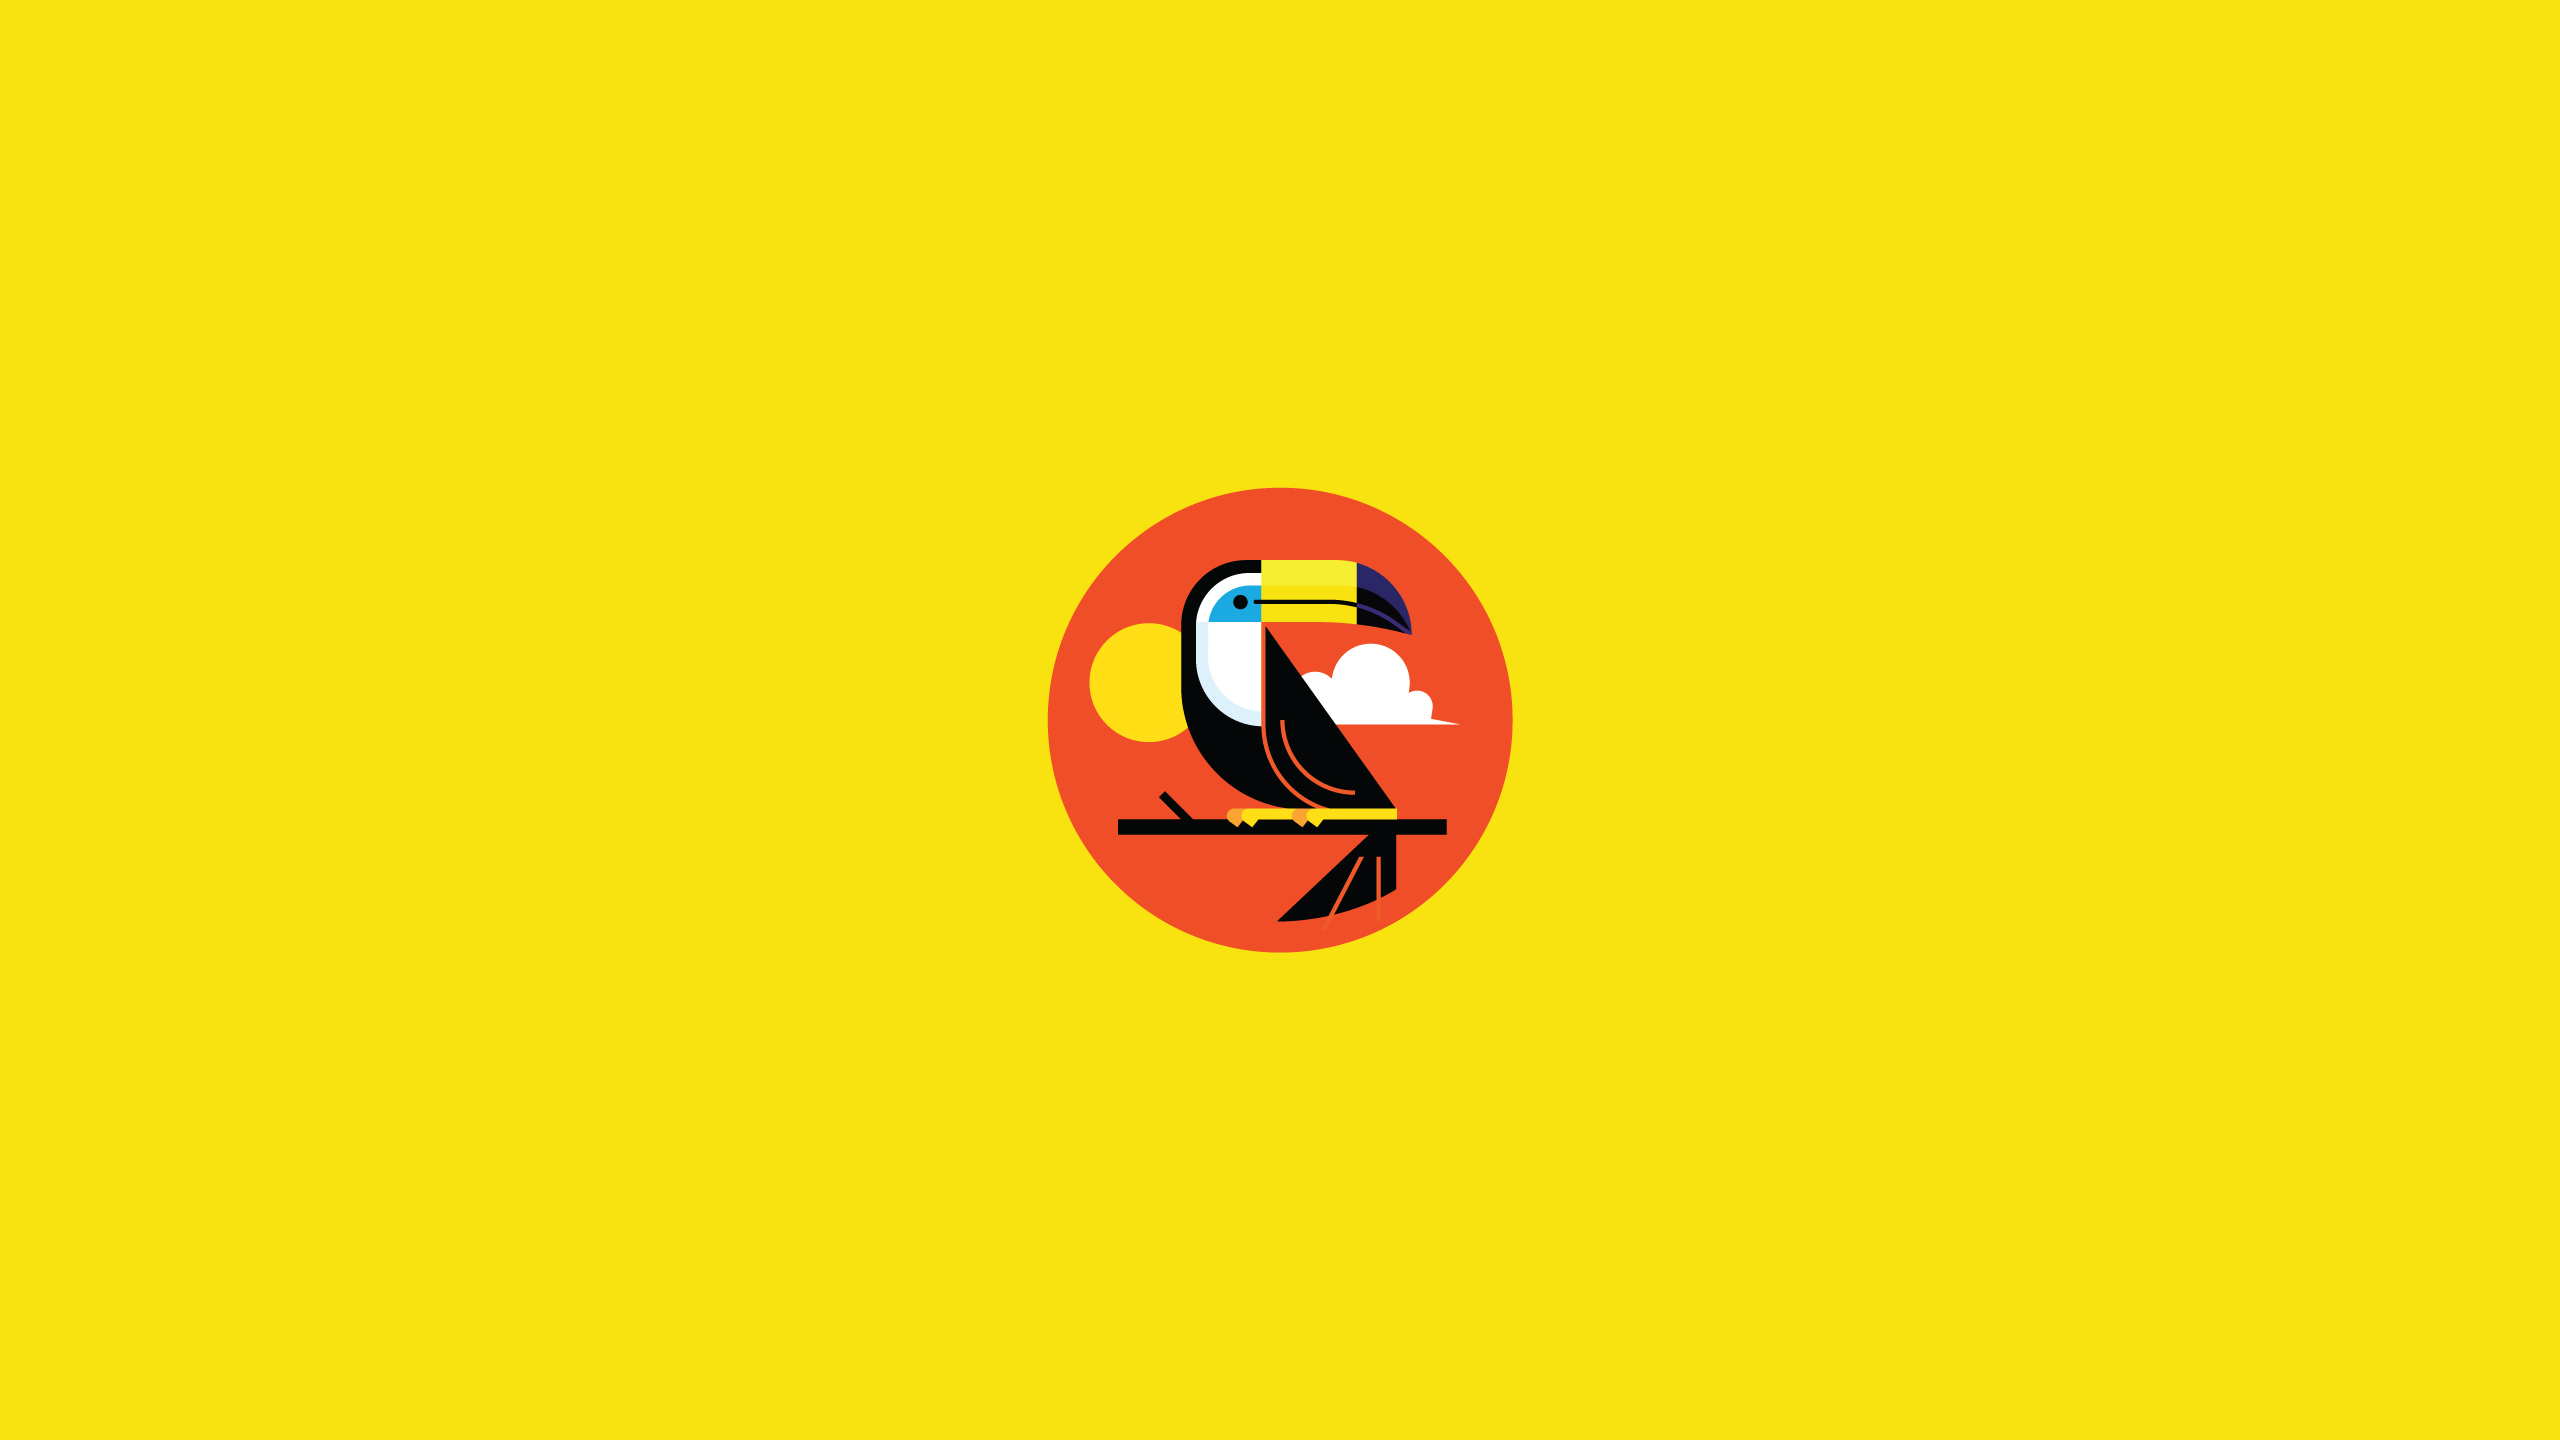 General 2560x1440 illustration yellow red toucans birds digital art minimalism simple background yellow background